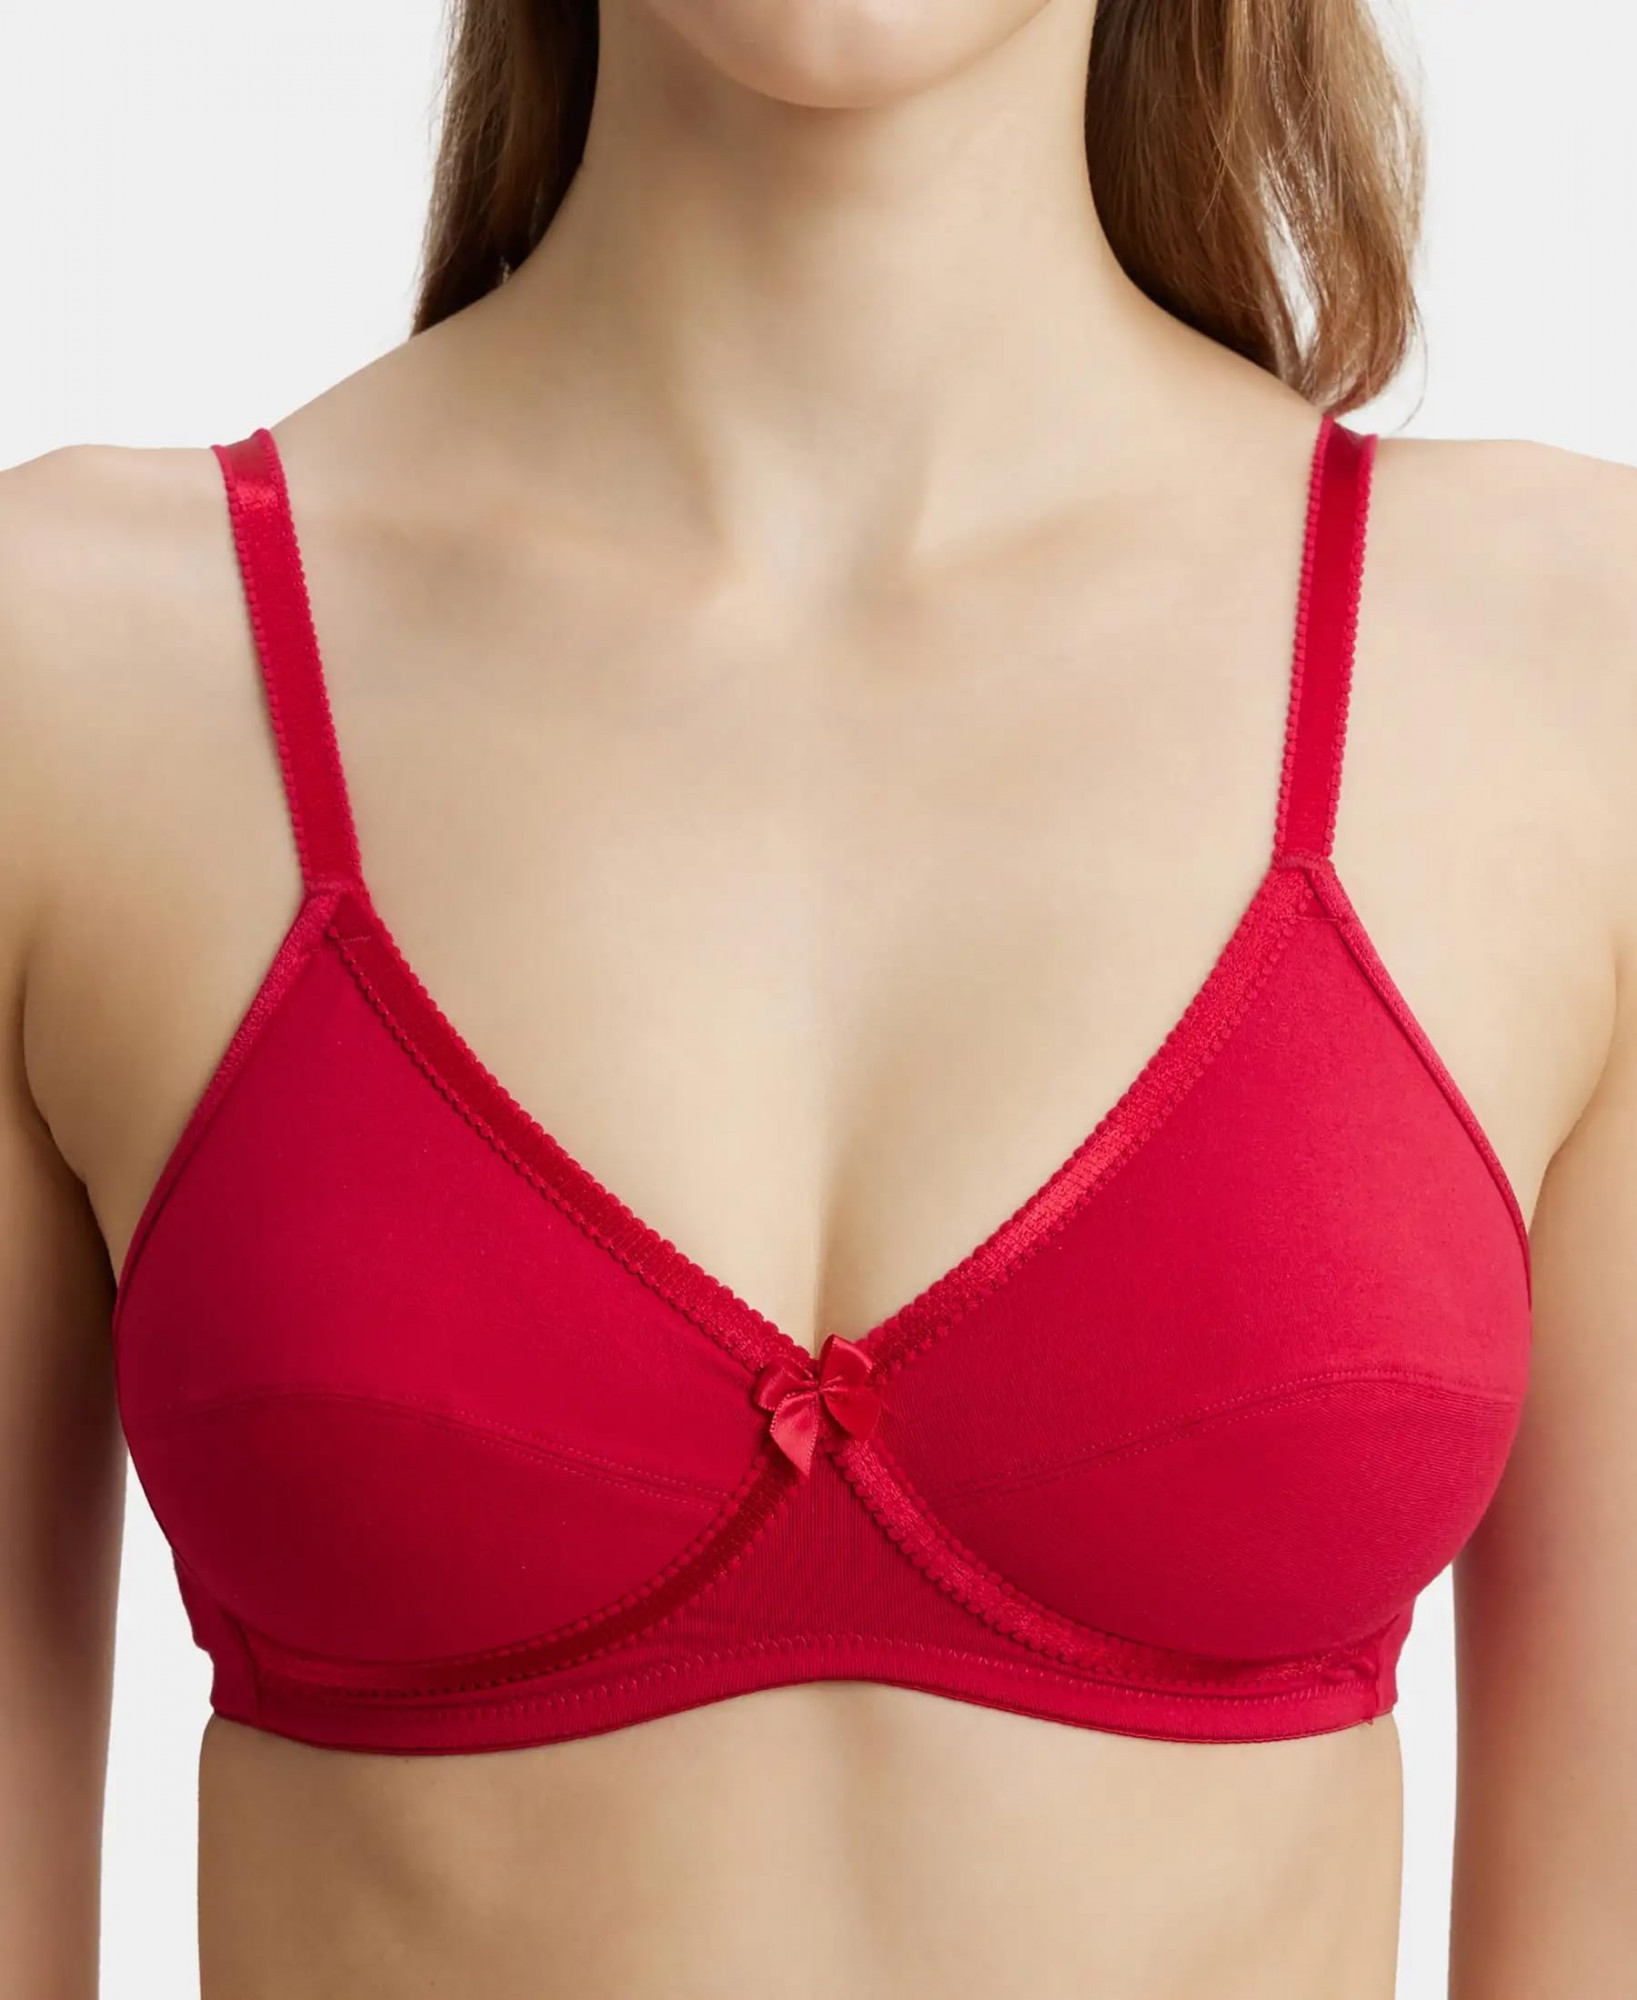 https://www.zebrs.com/uploads/zebrs/products/jockey-1242-womenamp039s-wirefree-non-padded-super-combed-cotton-elastane-stretch-medium-coverage-cross-over-everyday-bra-with-adjustable-strapsred-love40bsize-32b-96890651327573_l.jpg